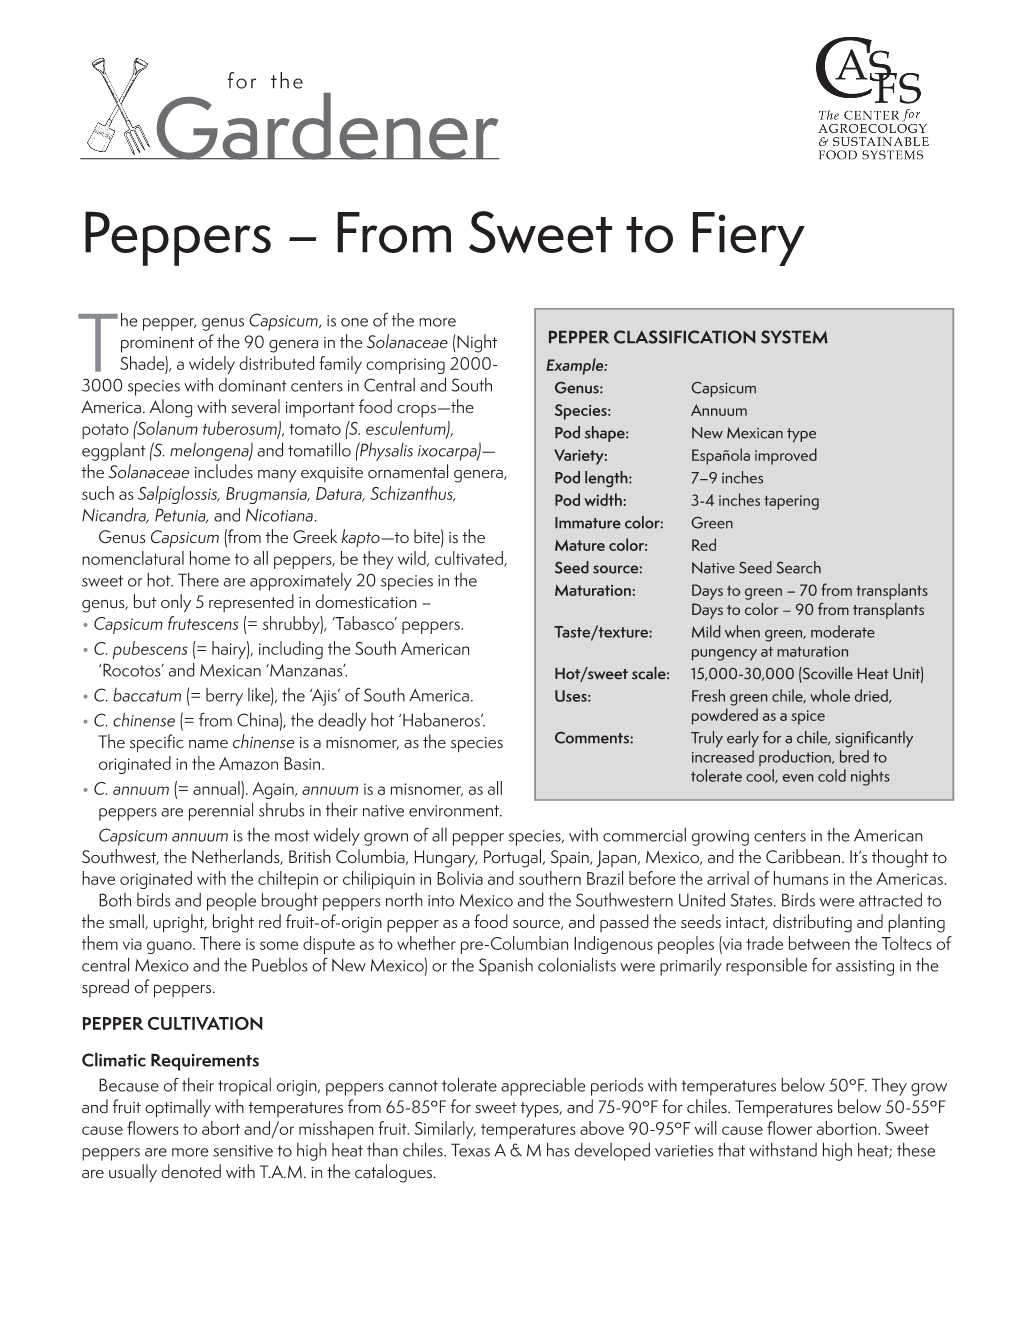 Peppers – from Sweet to Fiery